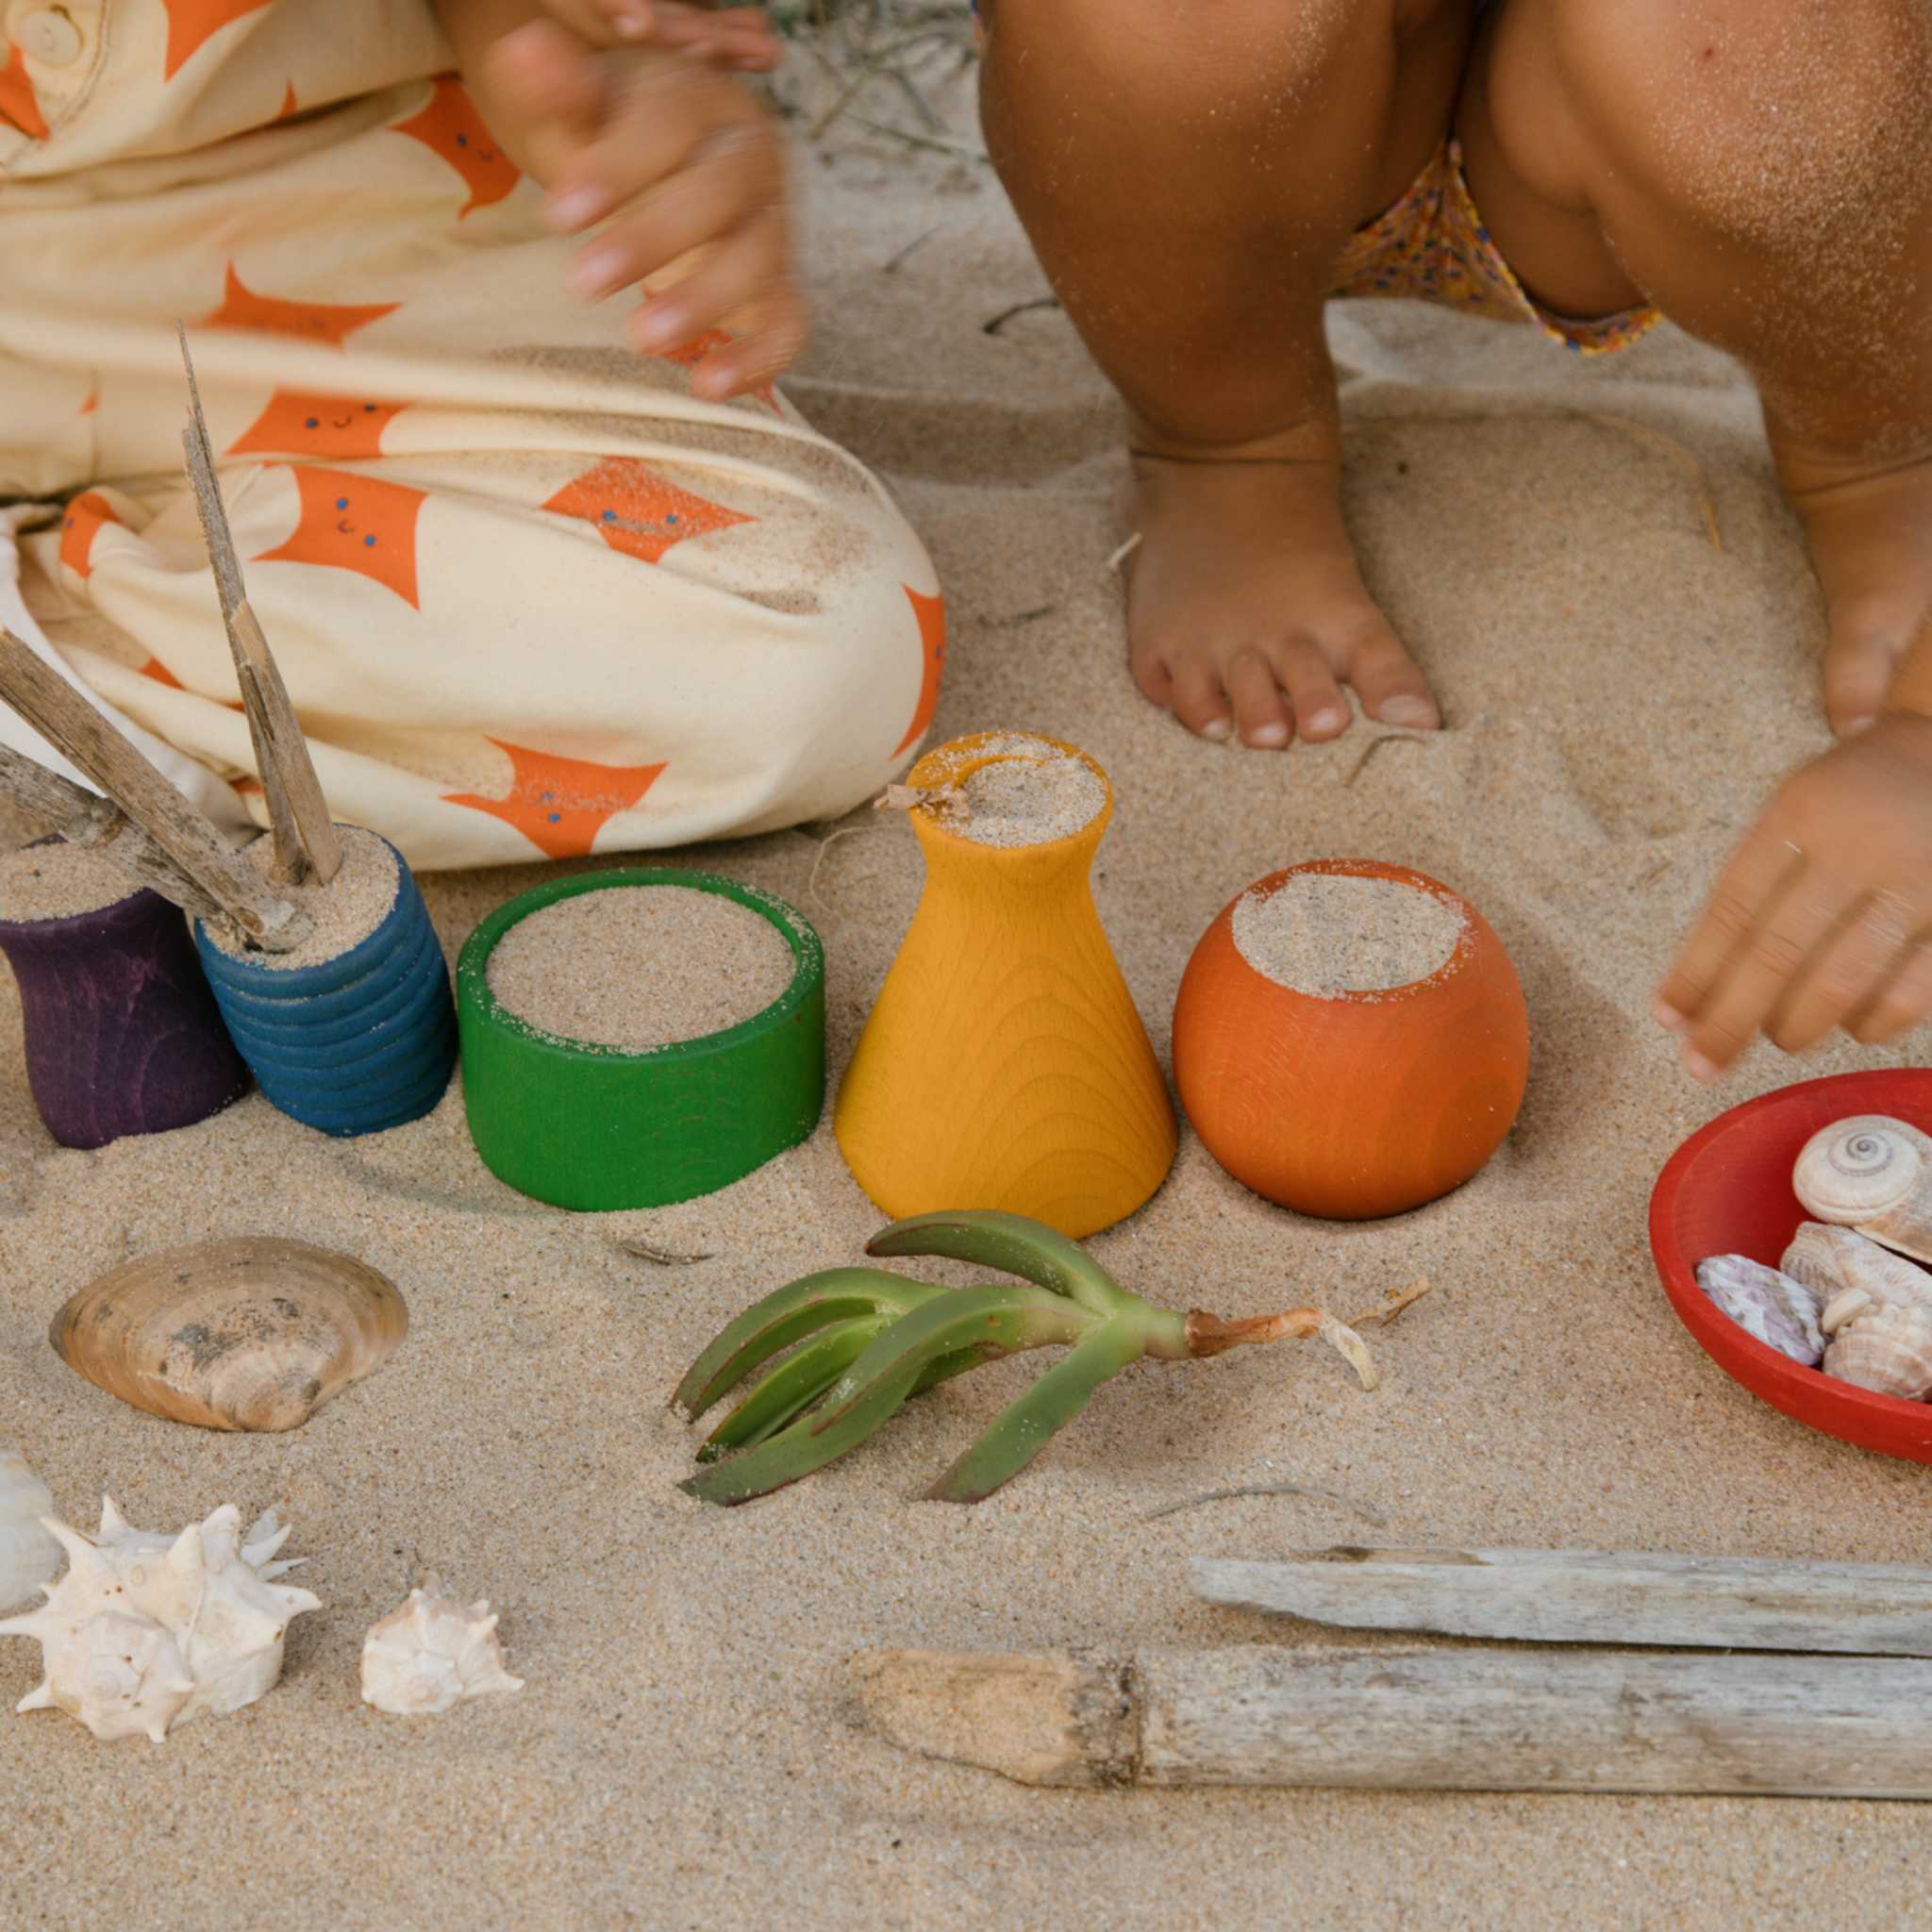 Grapat Pots - On Beach With Children and Treasures